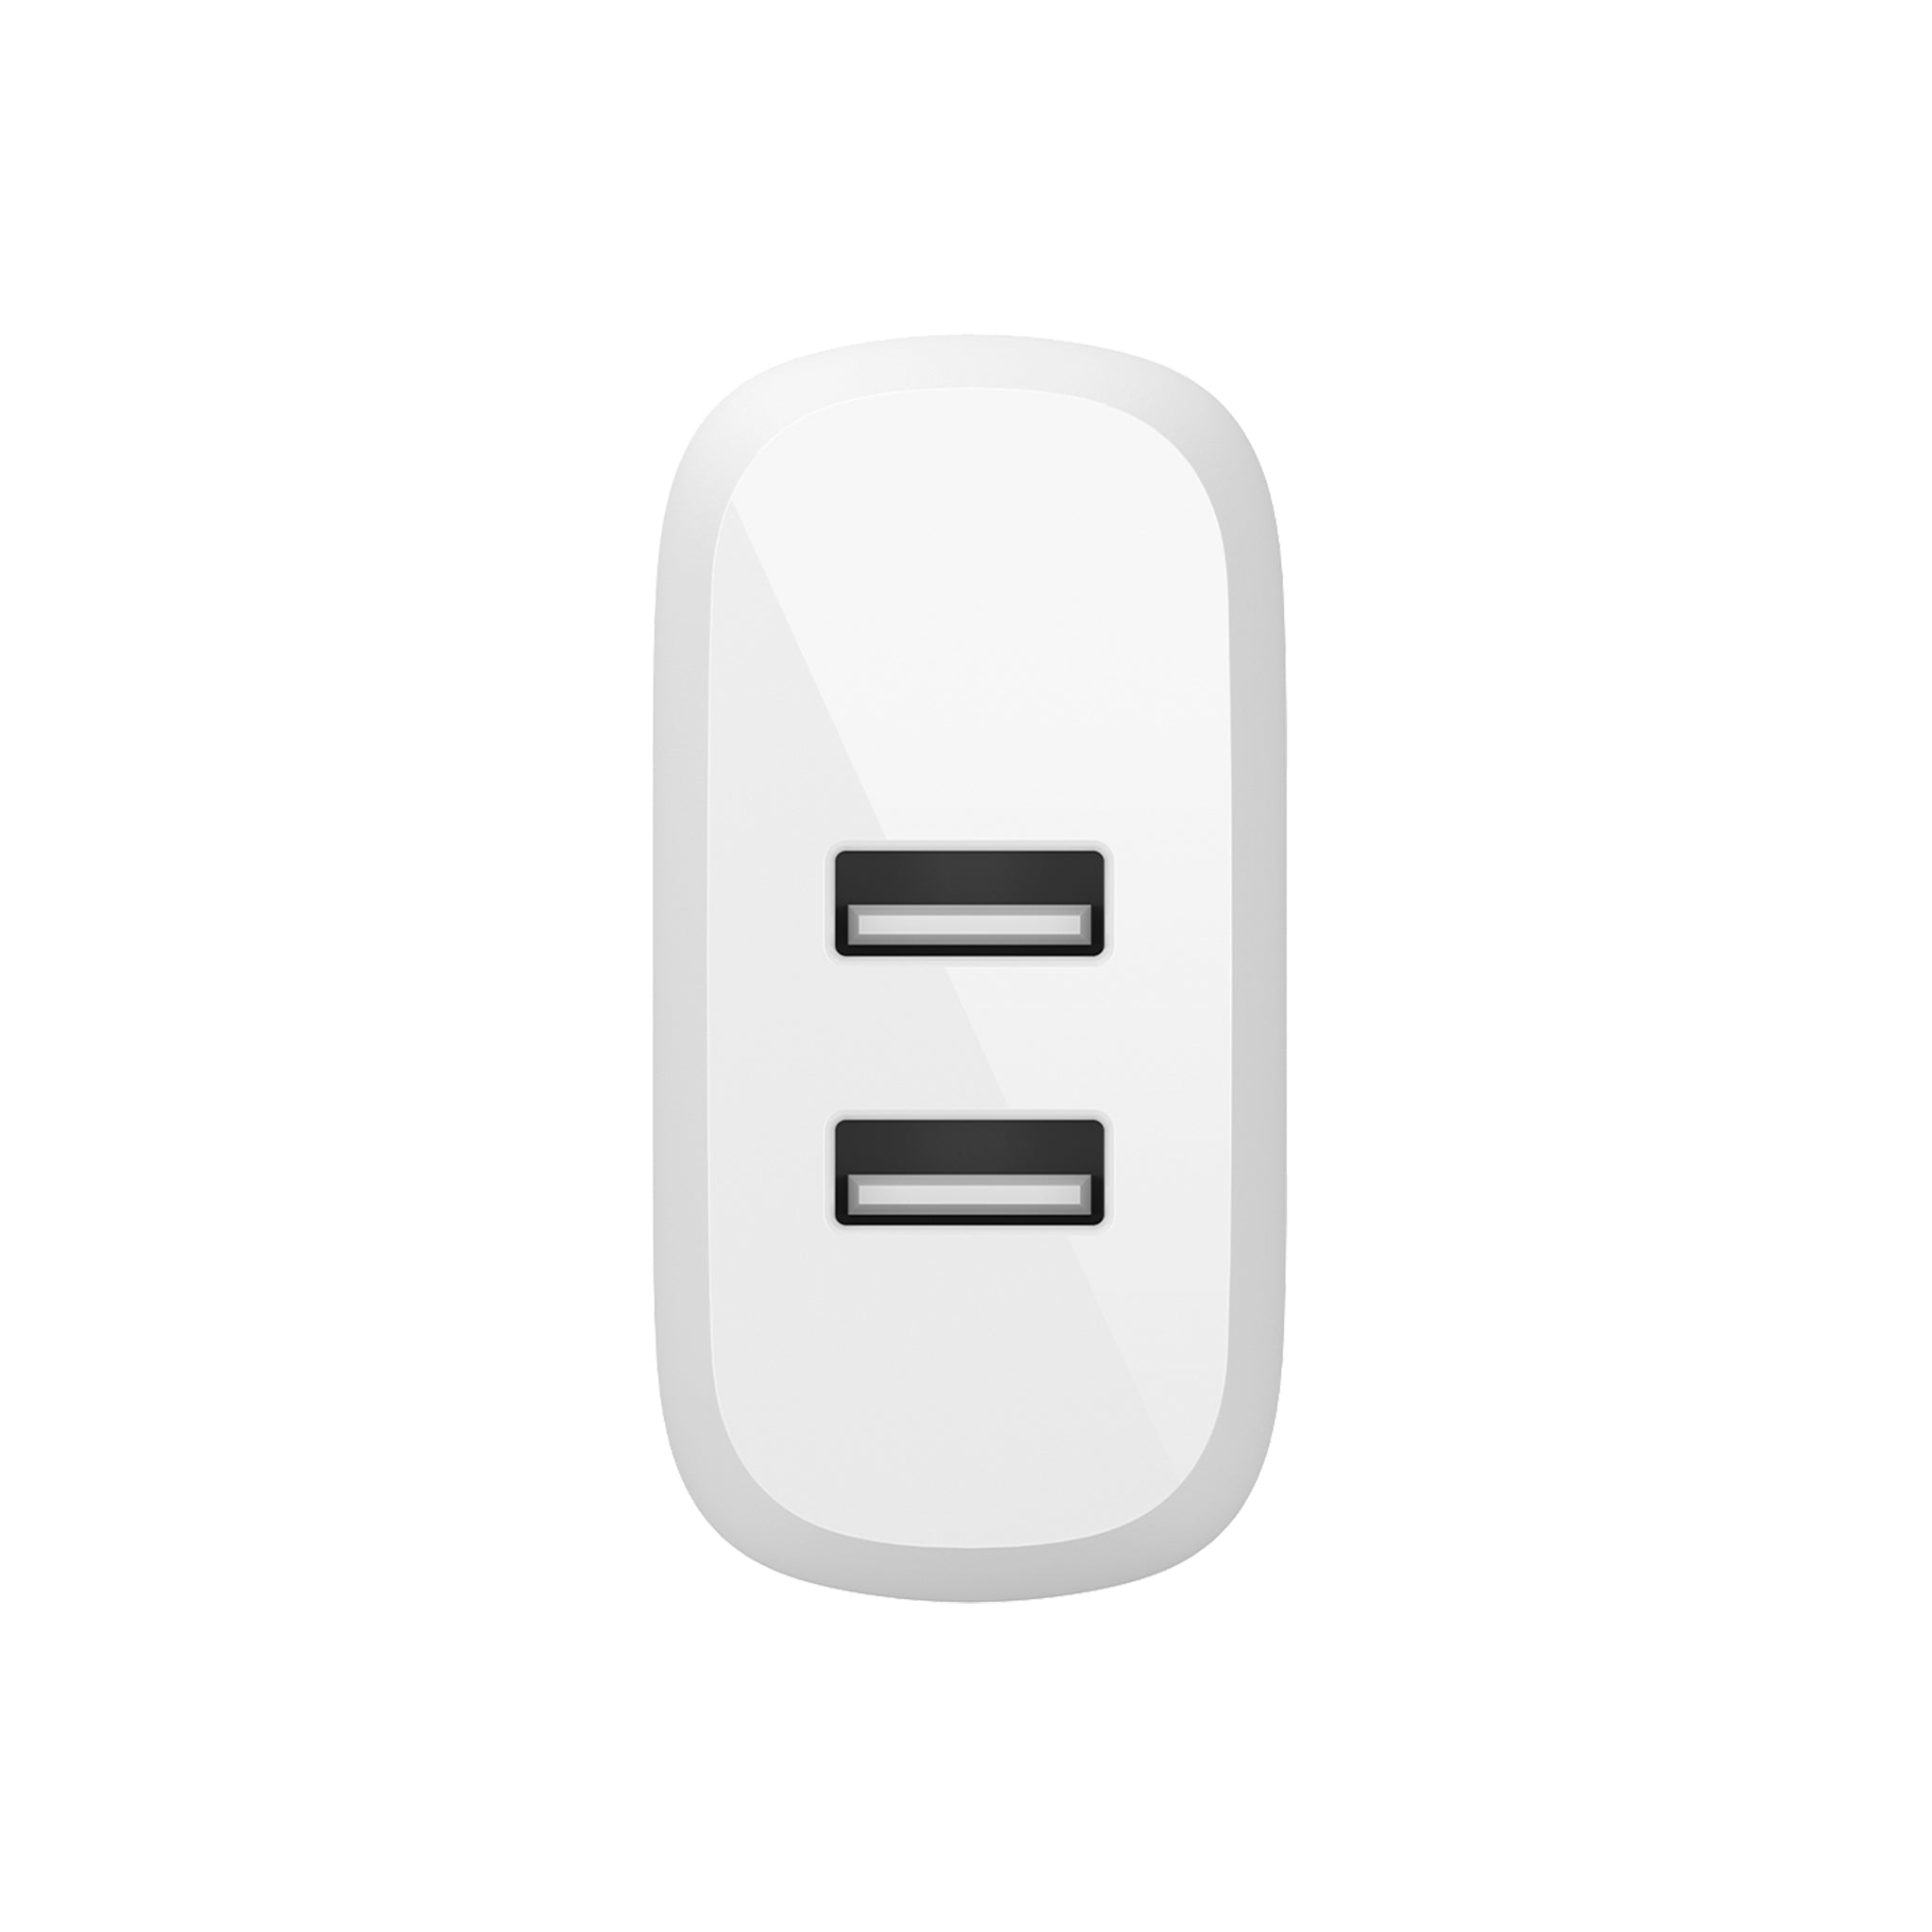 Belkin - Dual Port Usb A 24w Wall Charger - White